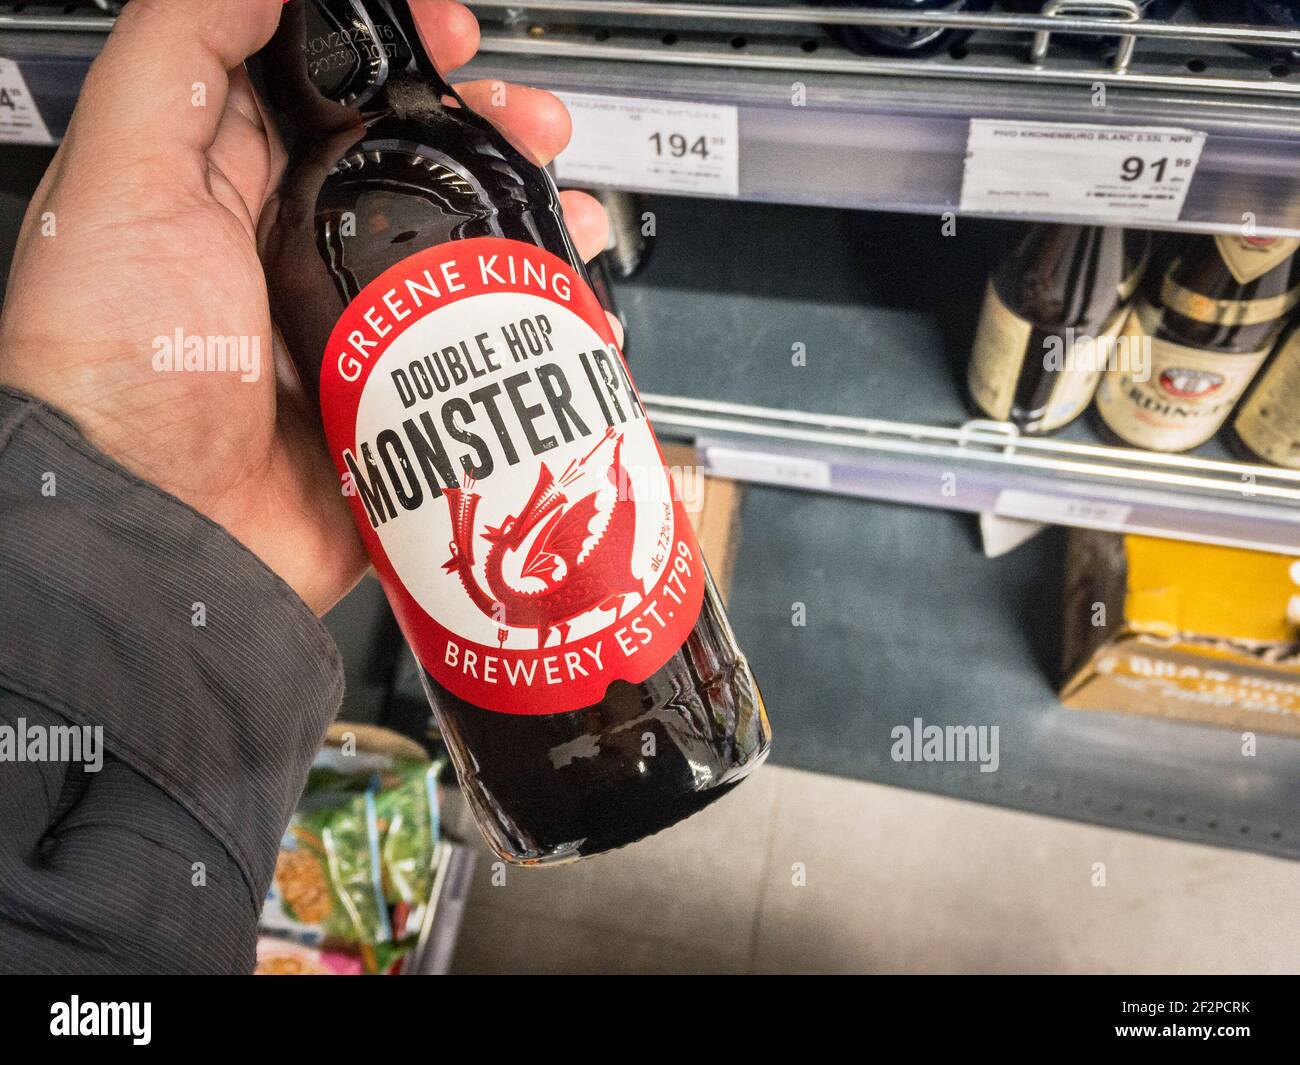 BELGRADE, SERBIA - MARCH 2 2021: Hands holding a bottle of Greene King Douple Hop Monster IPA beer. Greene King is a British chain of pubs and brewery Stock Photo